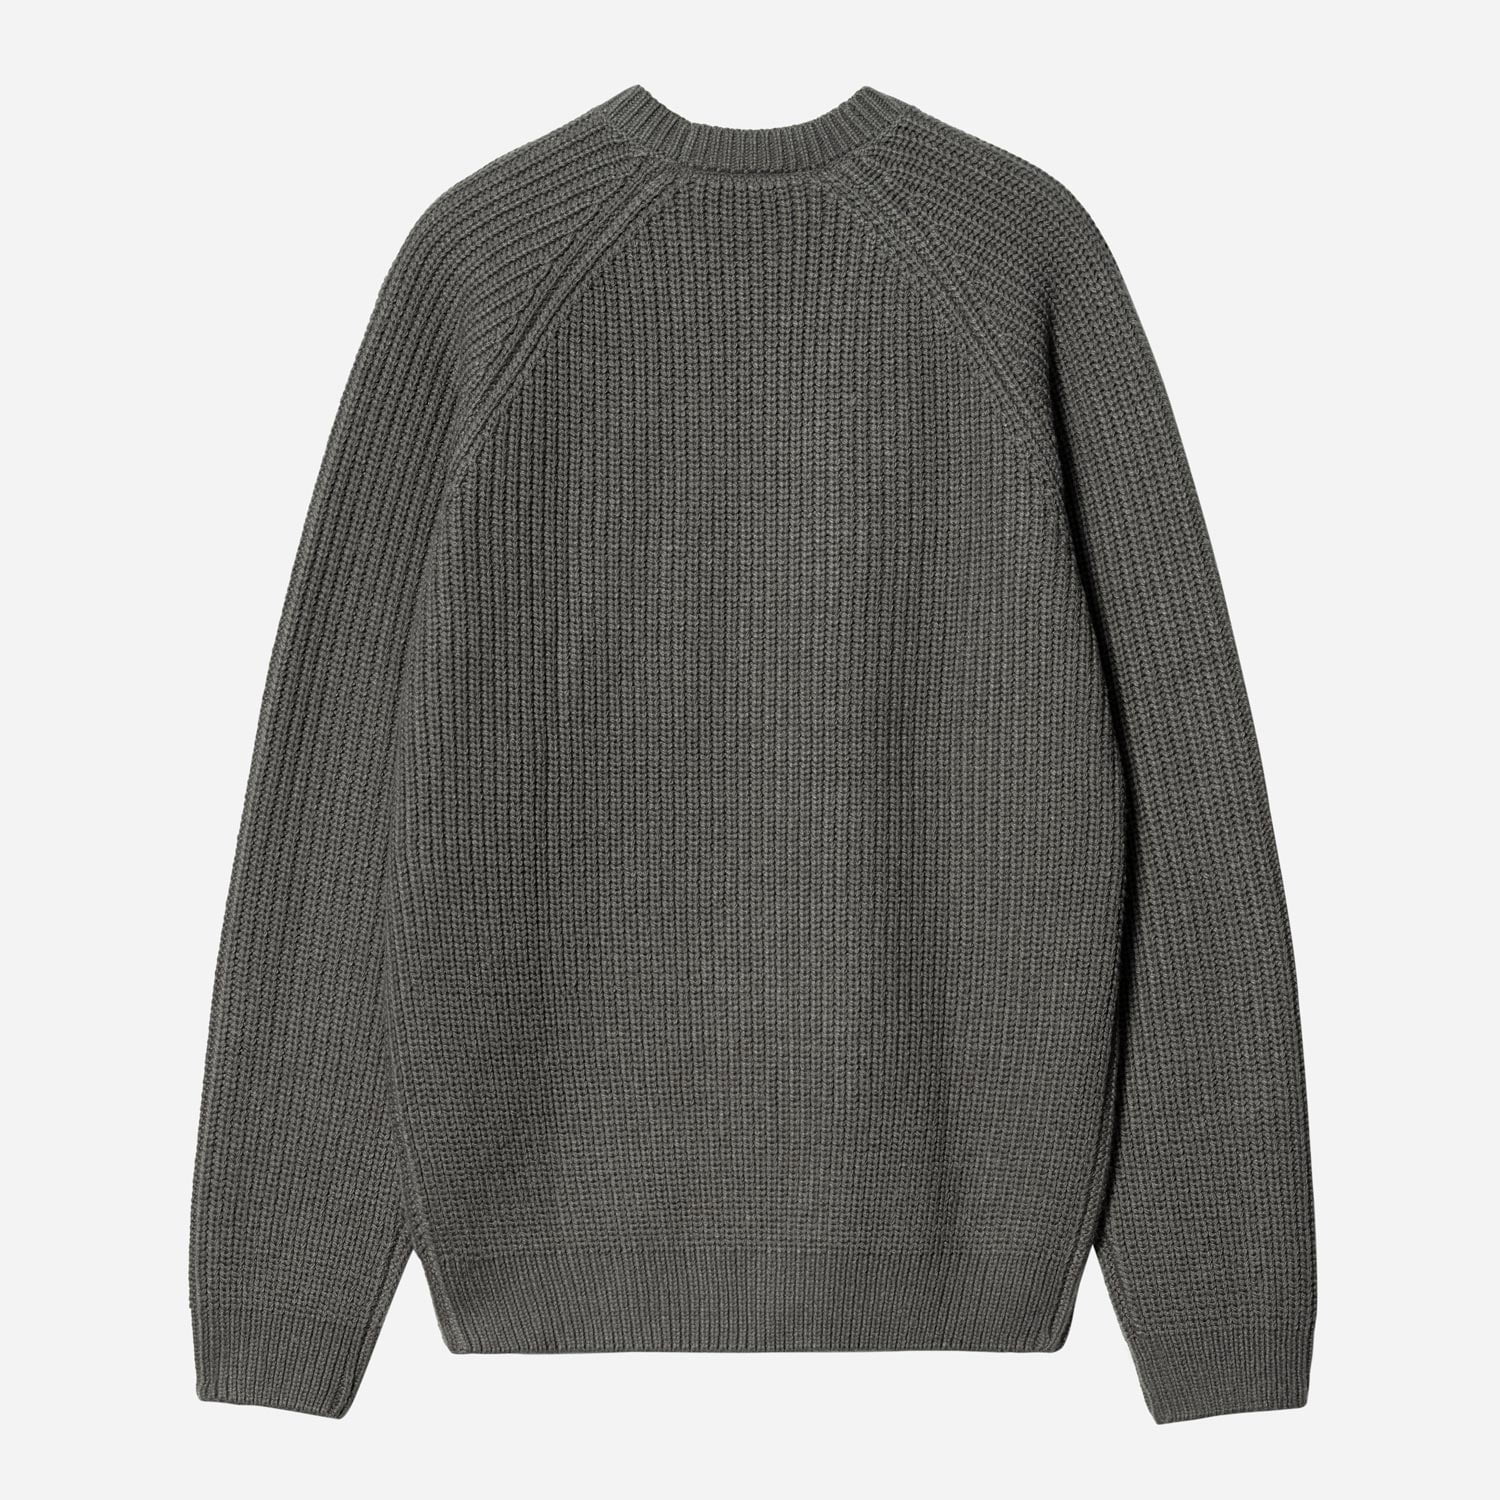 Carhartt WIP Forth Regular Fit Knitted Sweater - Smoke Green